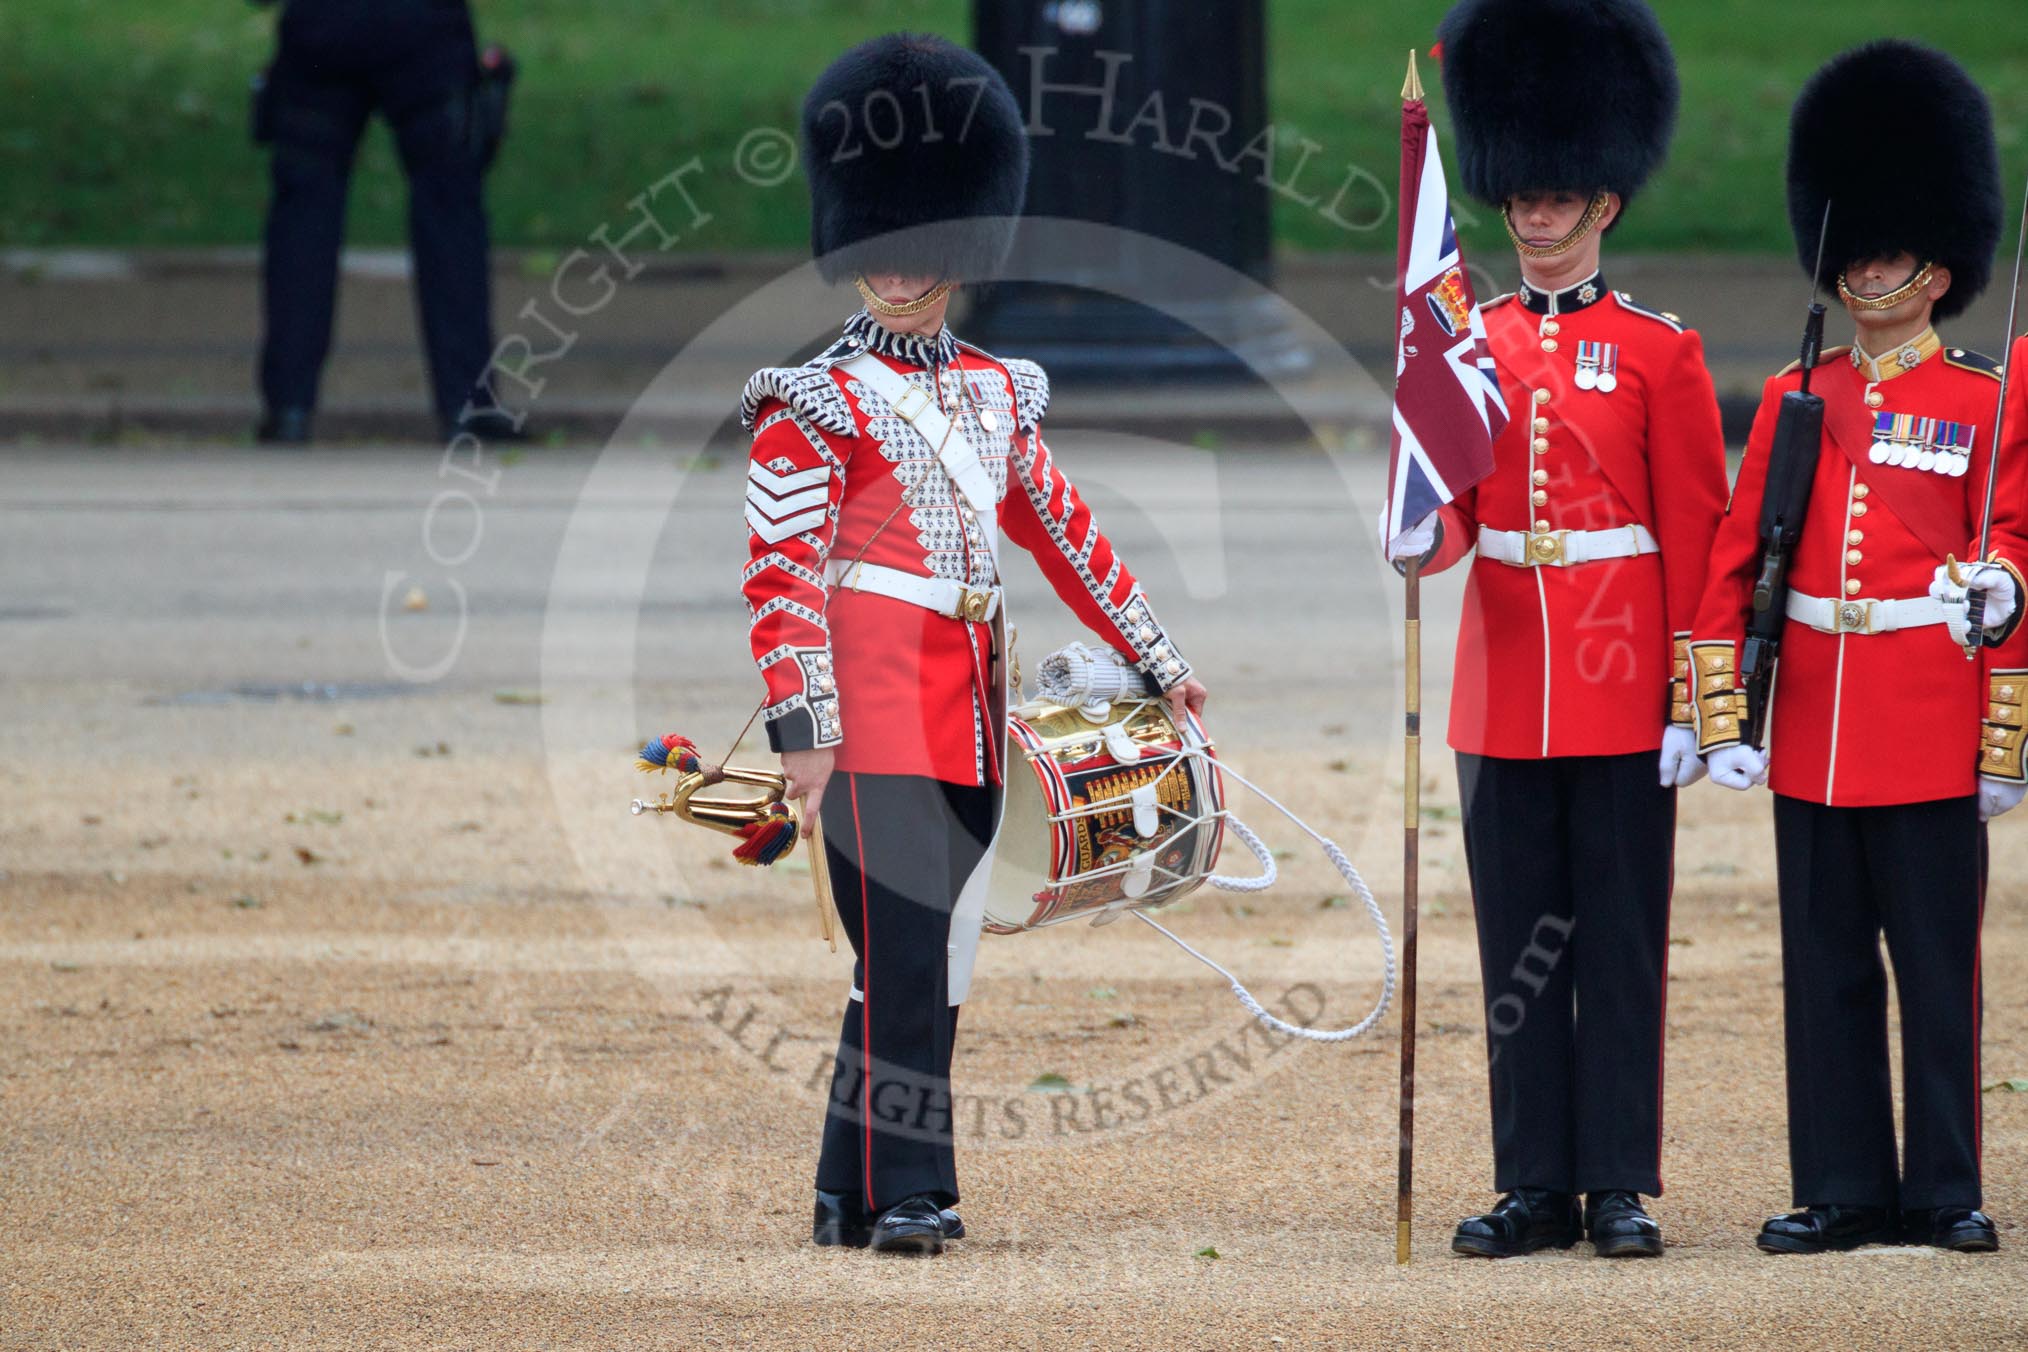 during The Colonel's Review {iptcyear4} (final rehearsal for Trooping the Colour, The Queen's Birthday Parade)  at Horse Guards Parade, Westminster, London, 2 June 2018, 11:13.